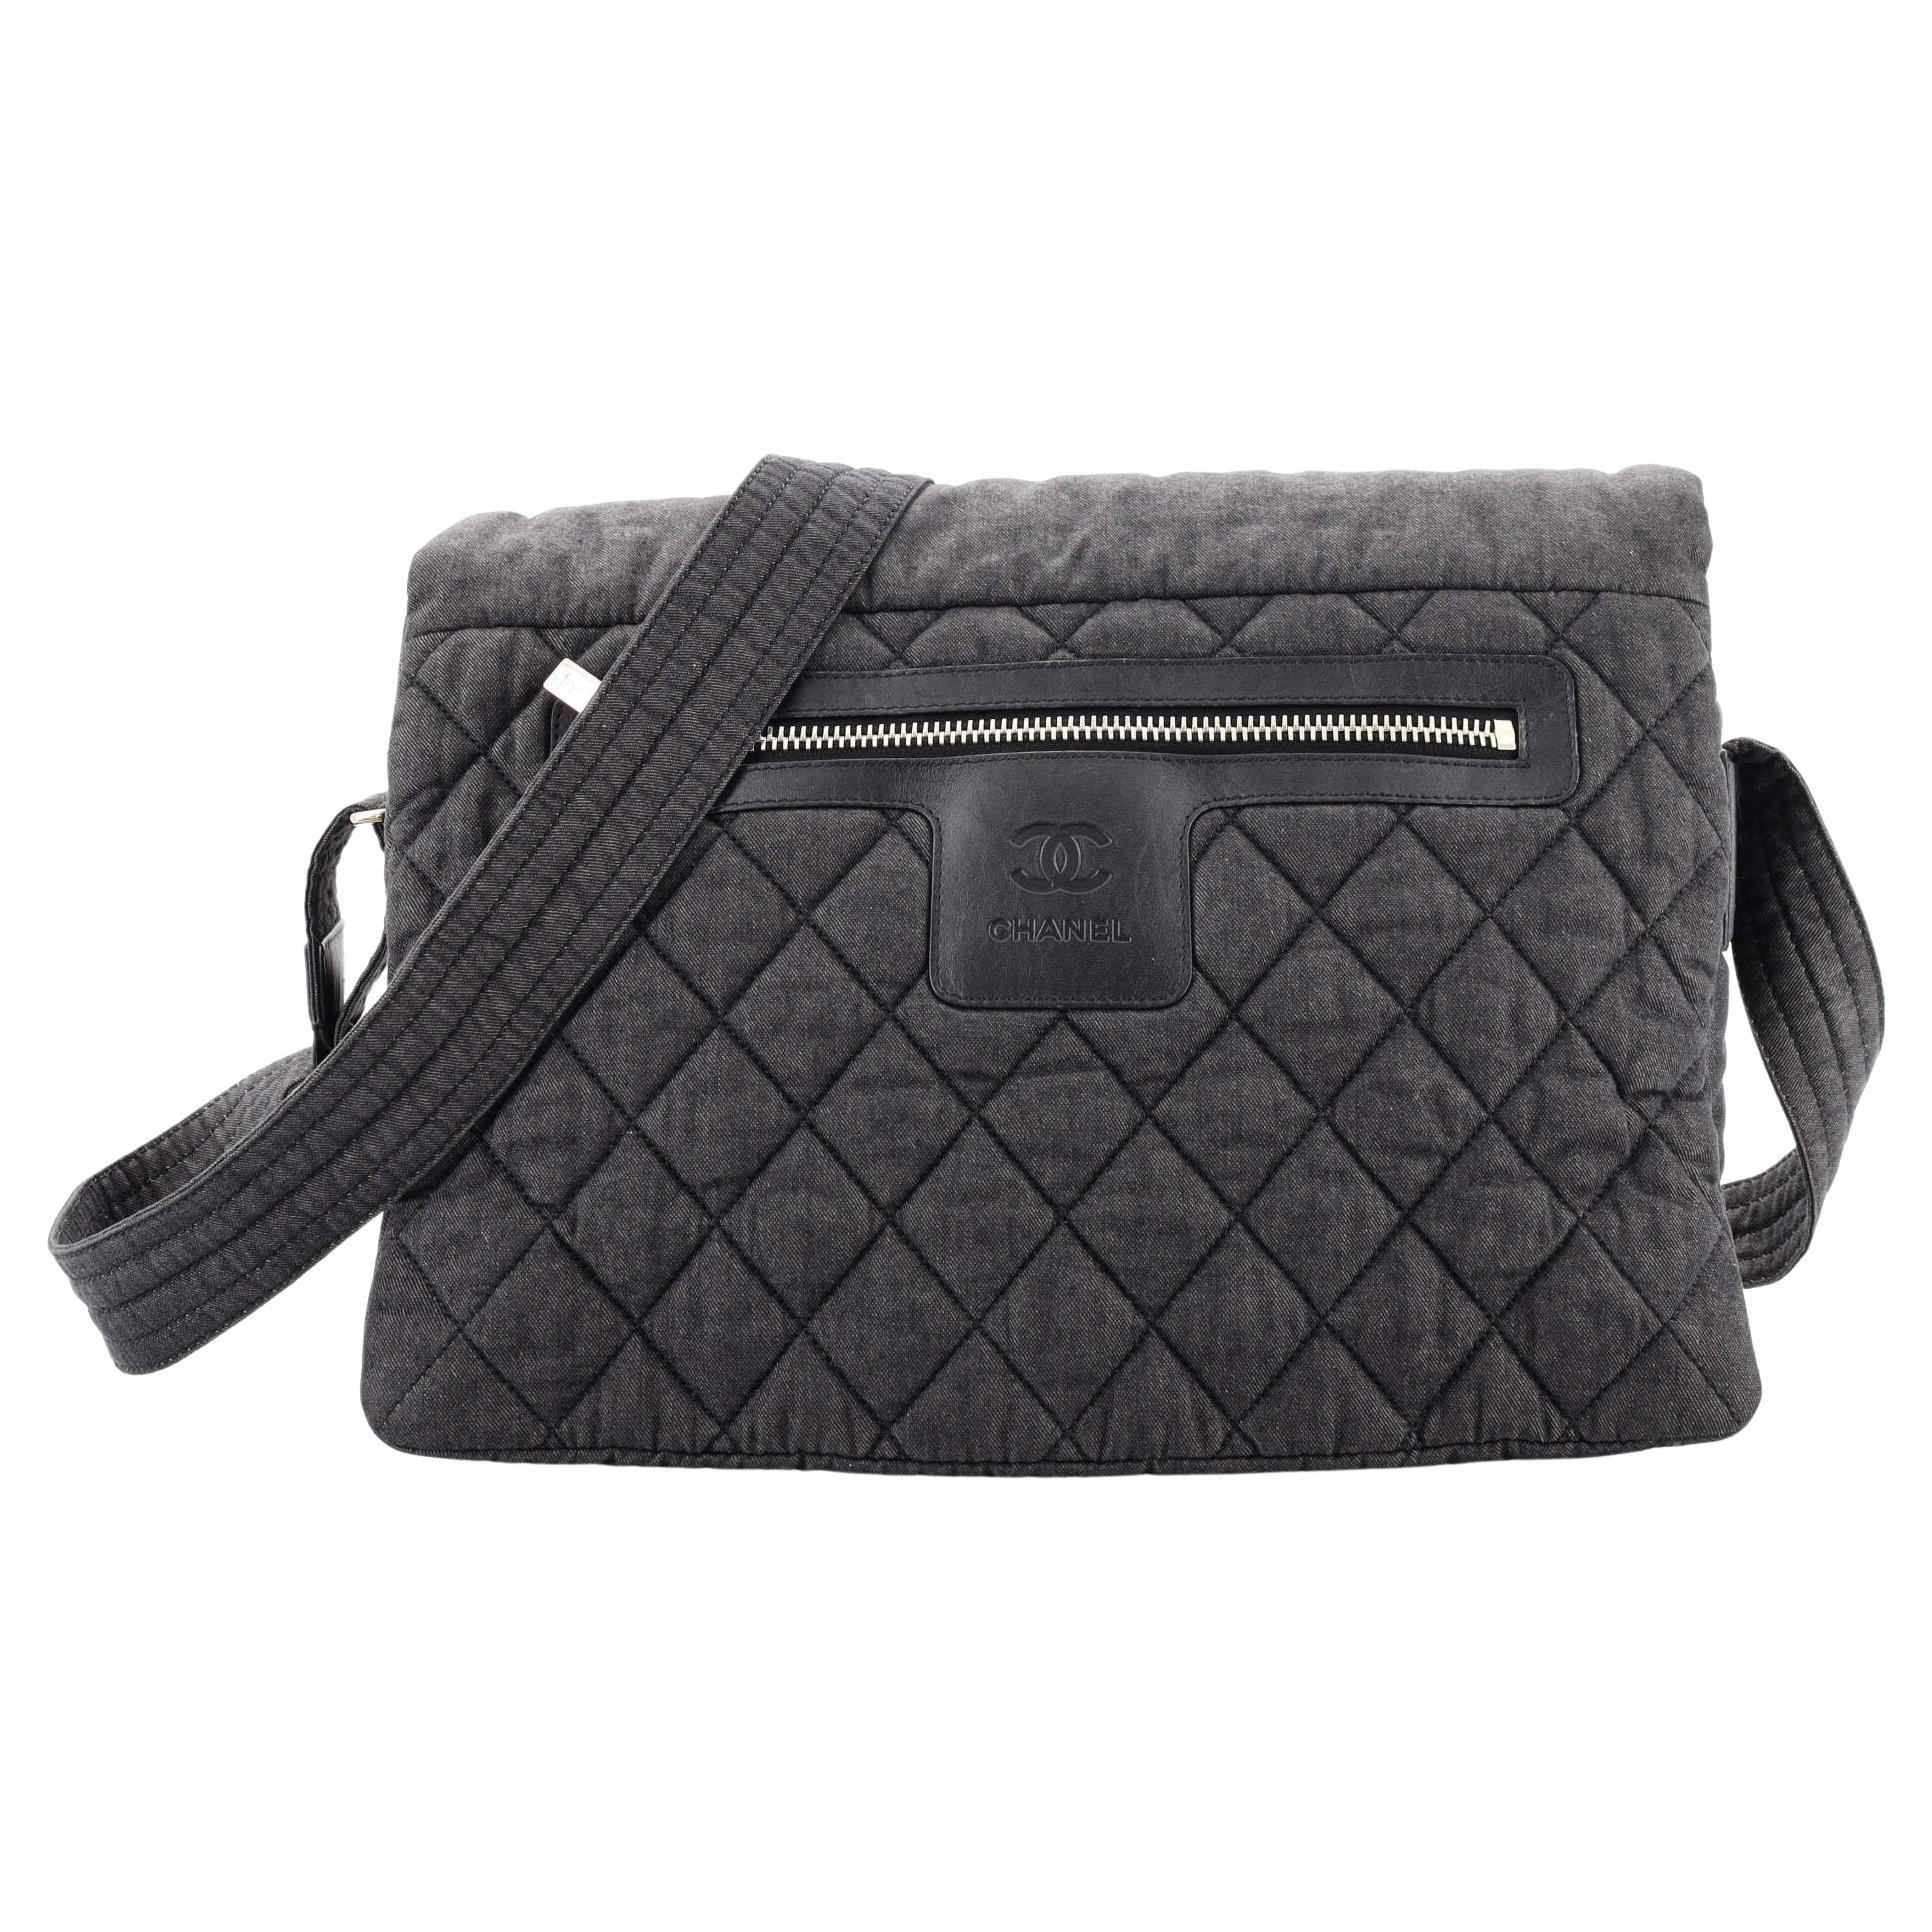 Chanel Coco Cocoon Messenger Bag Quilted Denim Large